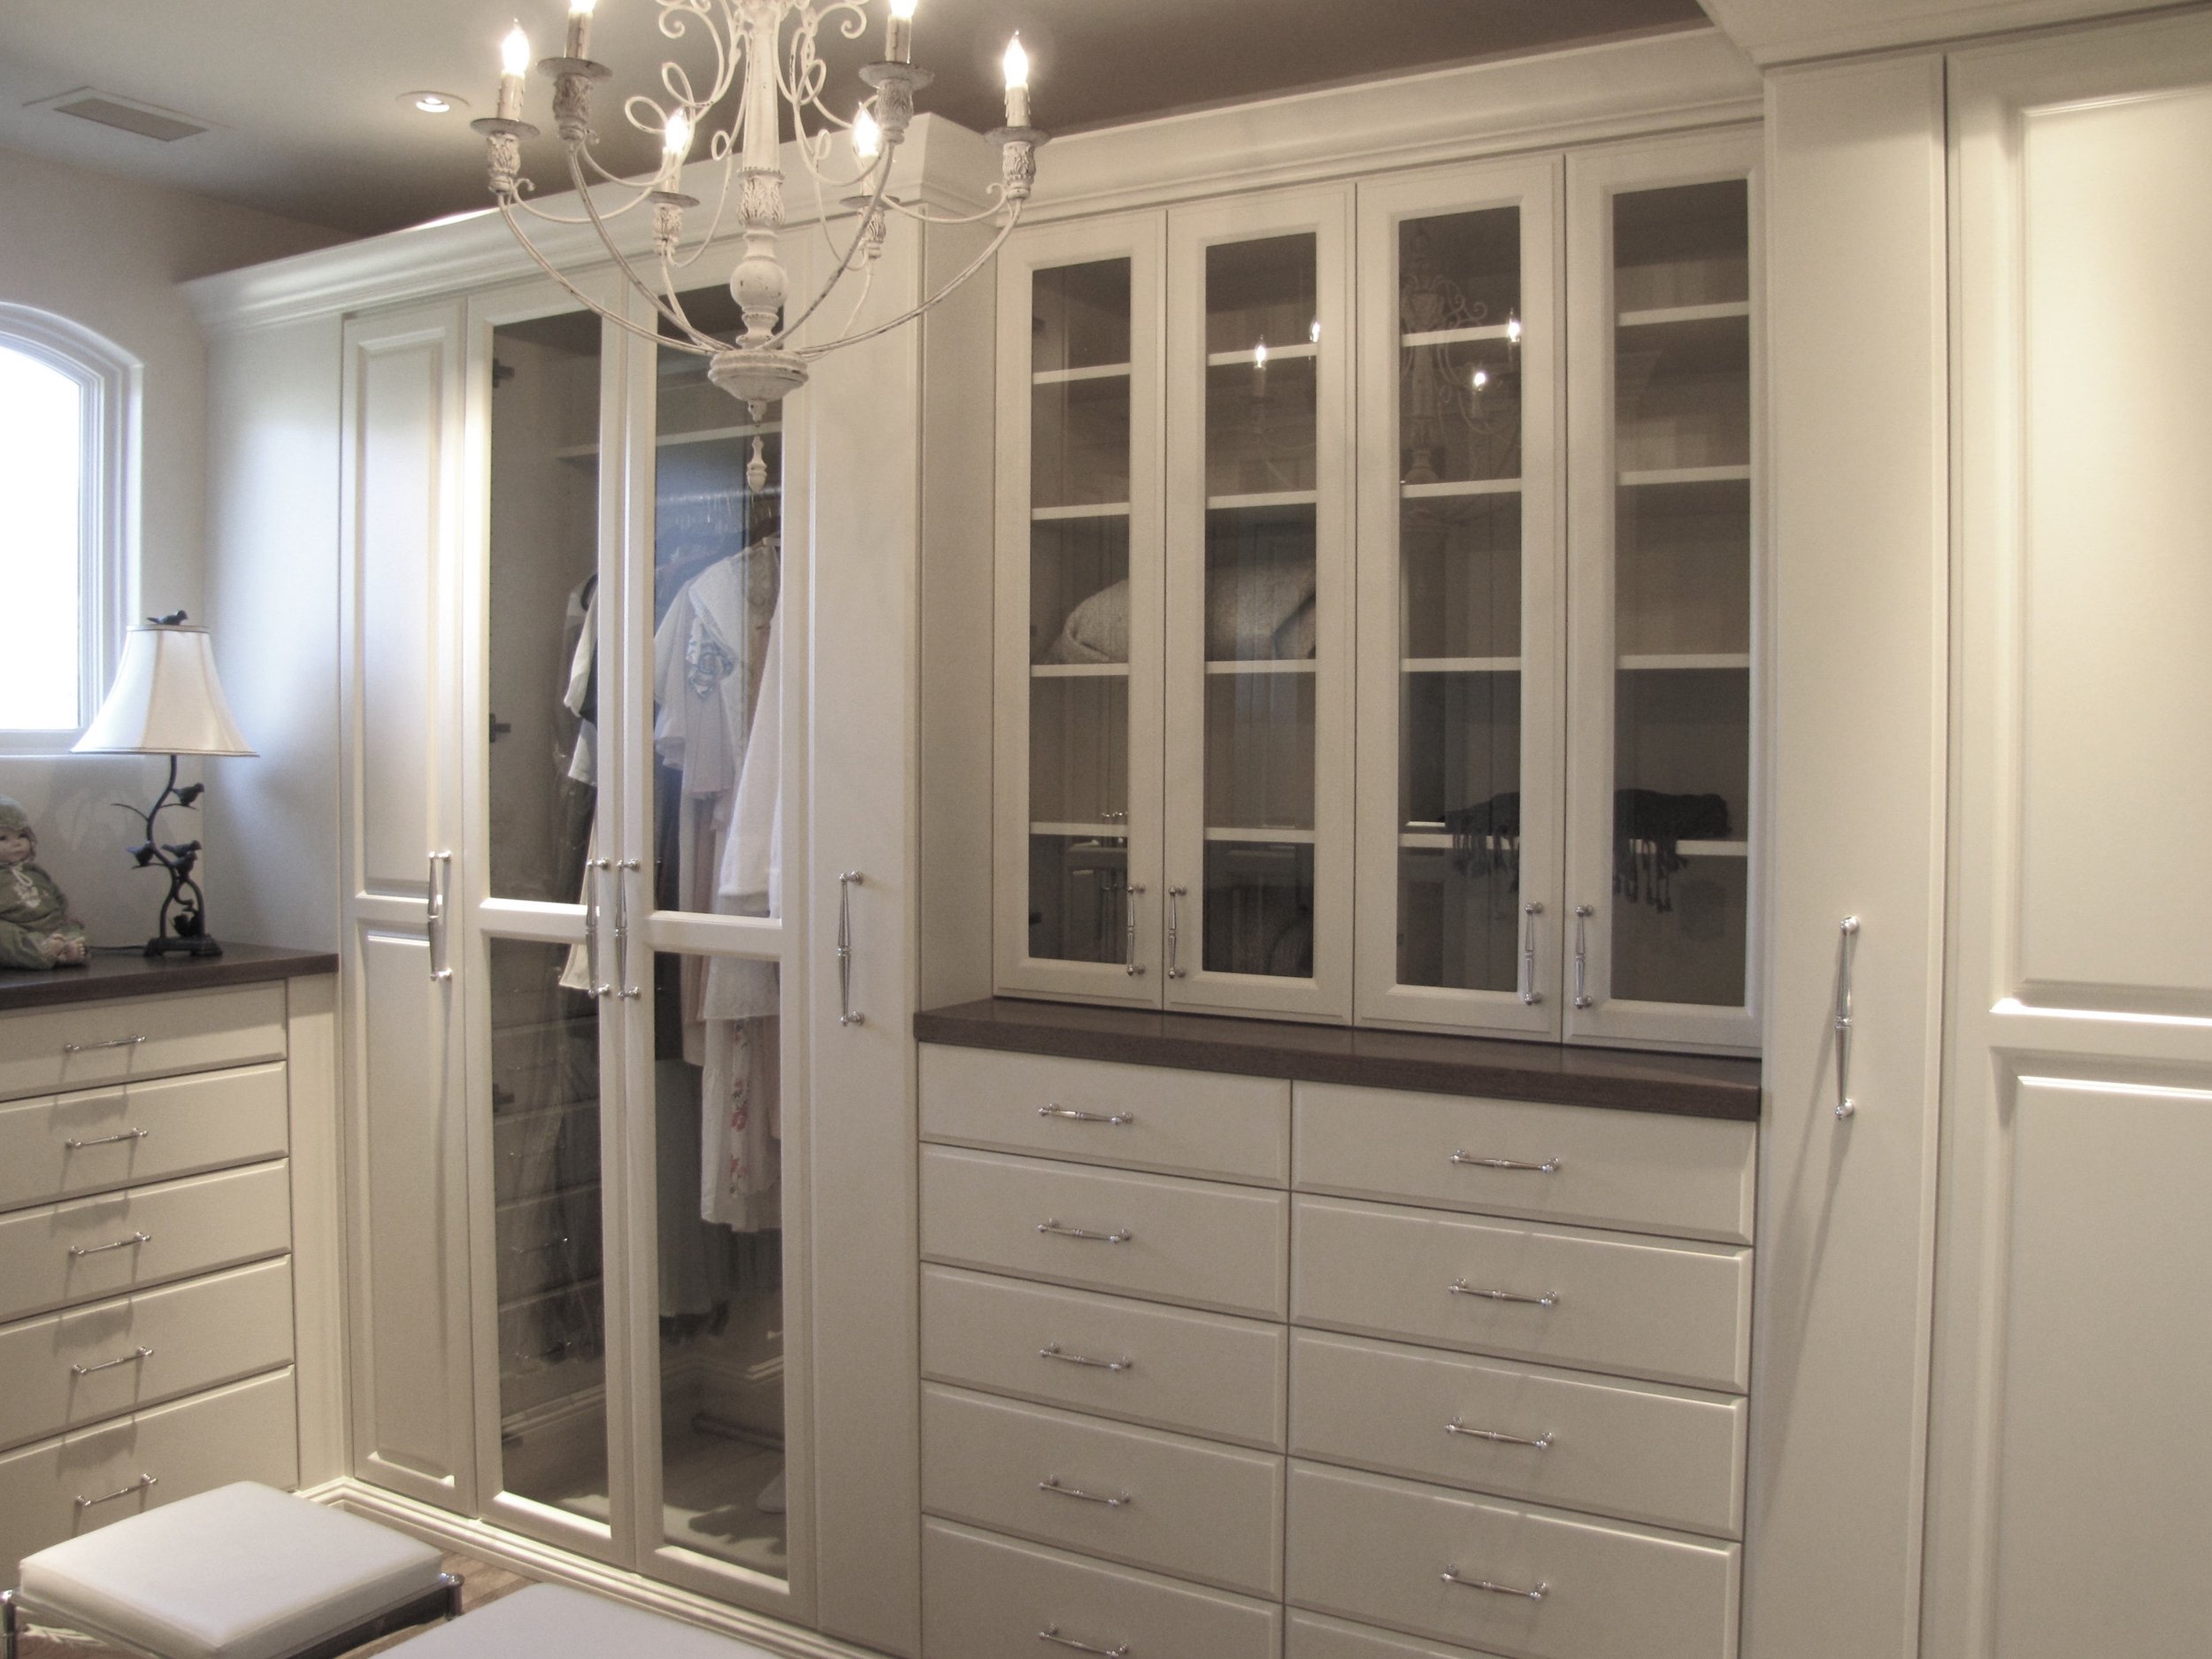 CUSTOM WALK IN PANTRY — R C CABINETS & CLOSETS , Sonoma Custom Cabinetry  and Closets